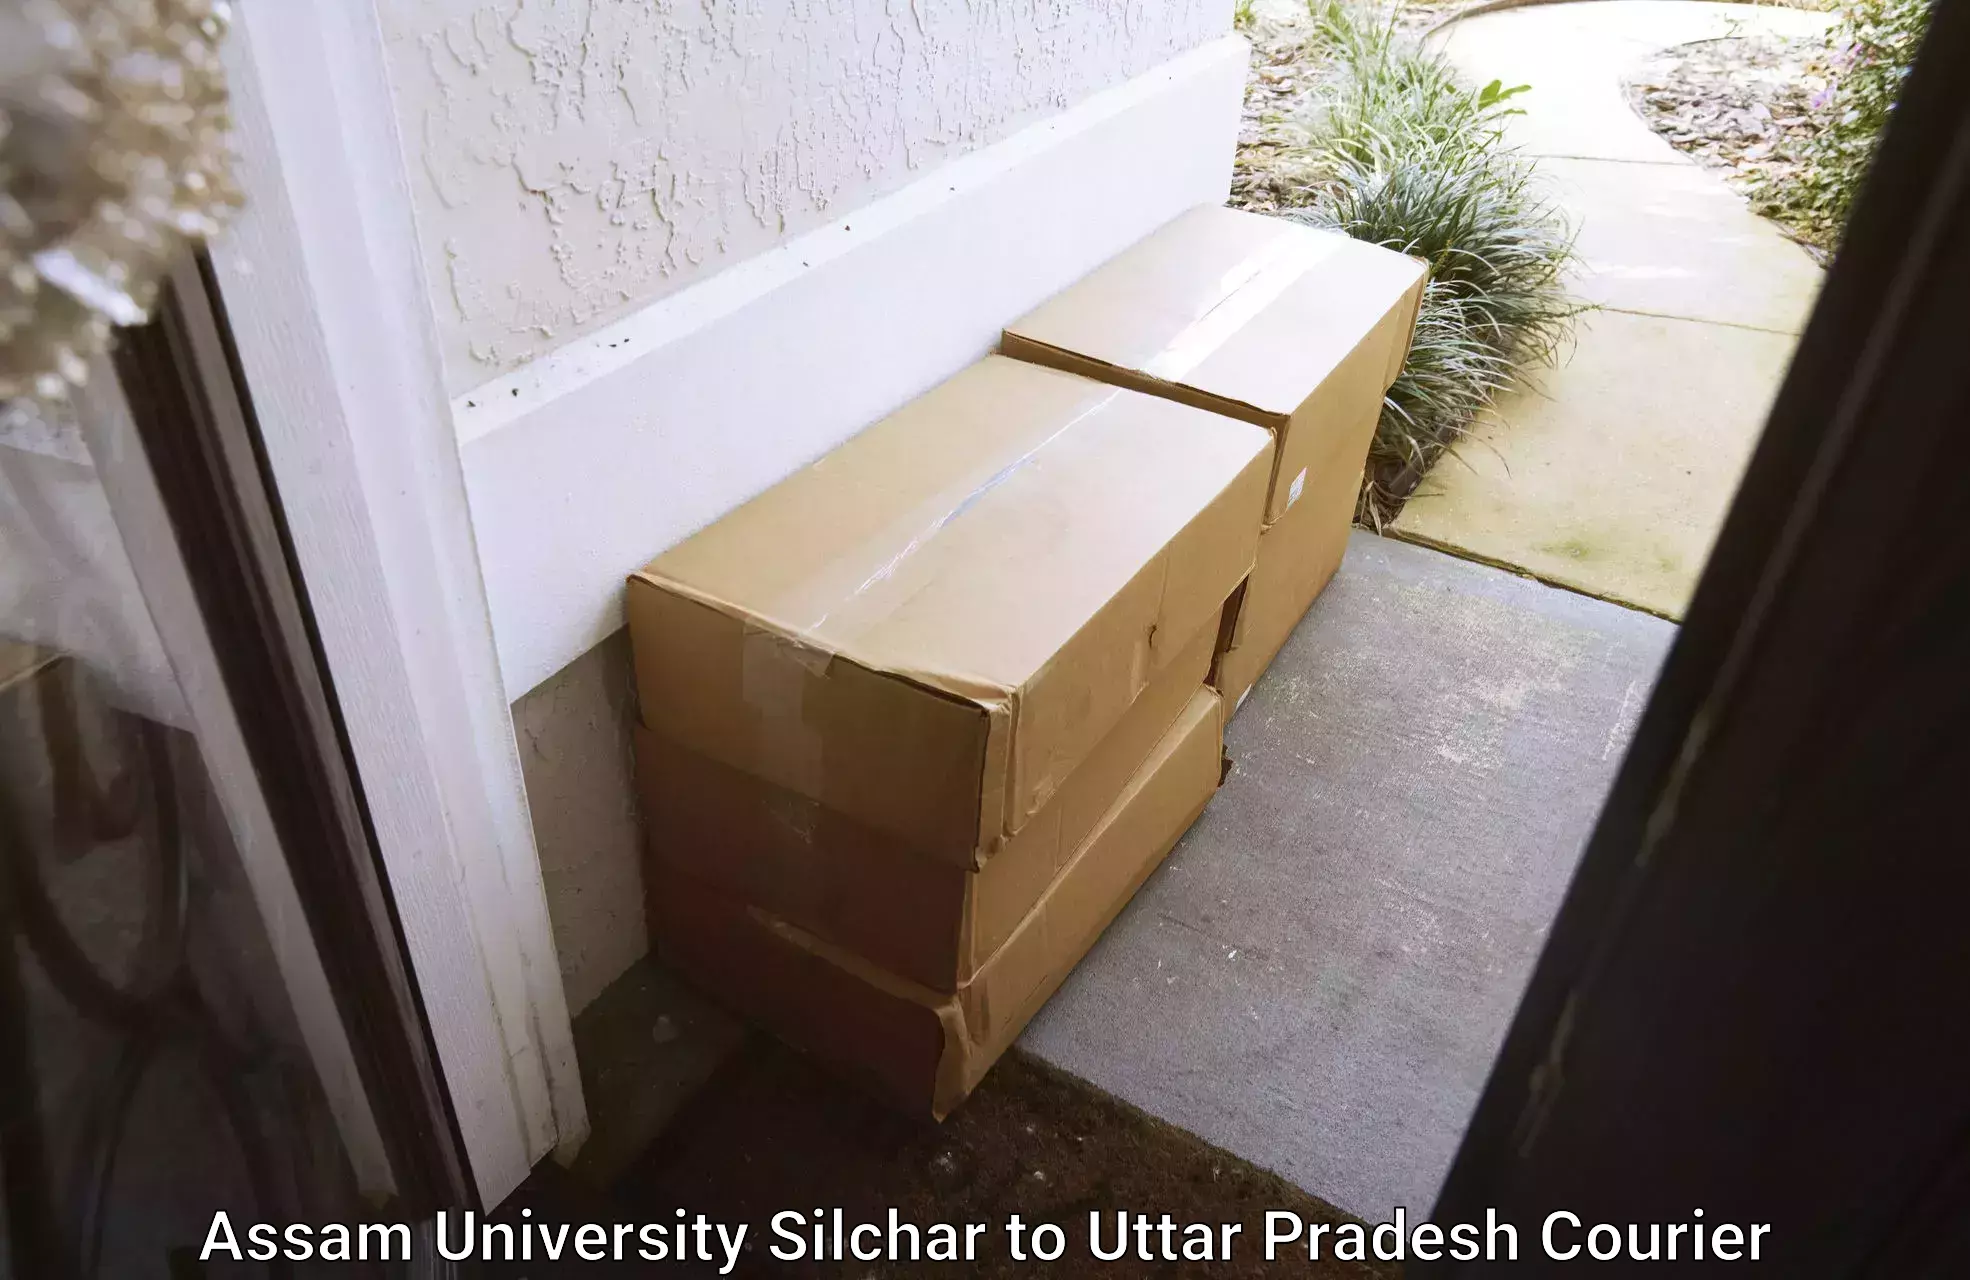 Budget-friendly shipping in Assam University Silchar to Sultanpur Avadh